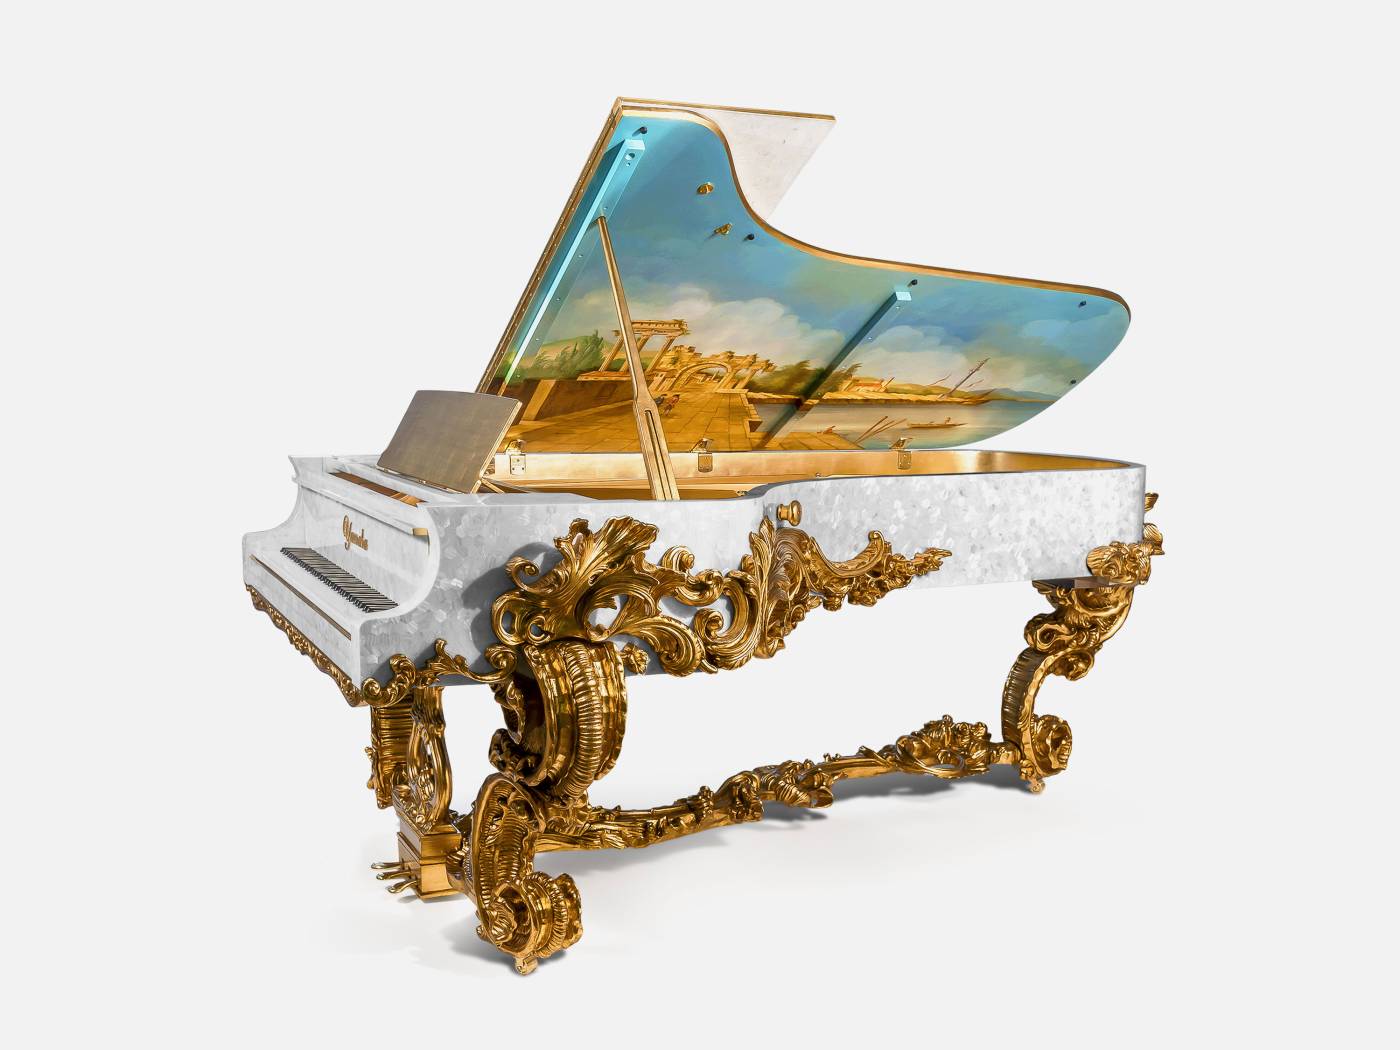 ART. 2711 - C.G. Capelletti quality furniture and timeless elegance with luxury made in italy contemporary Pianos.